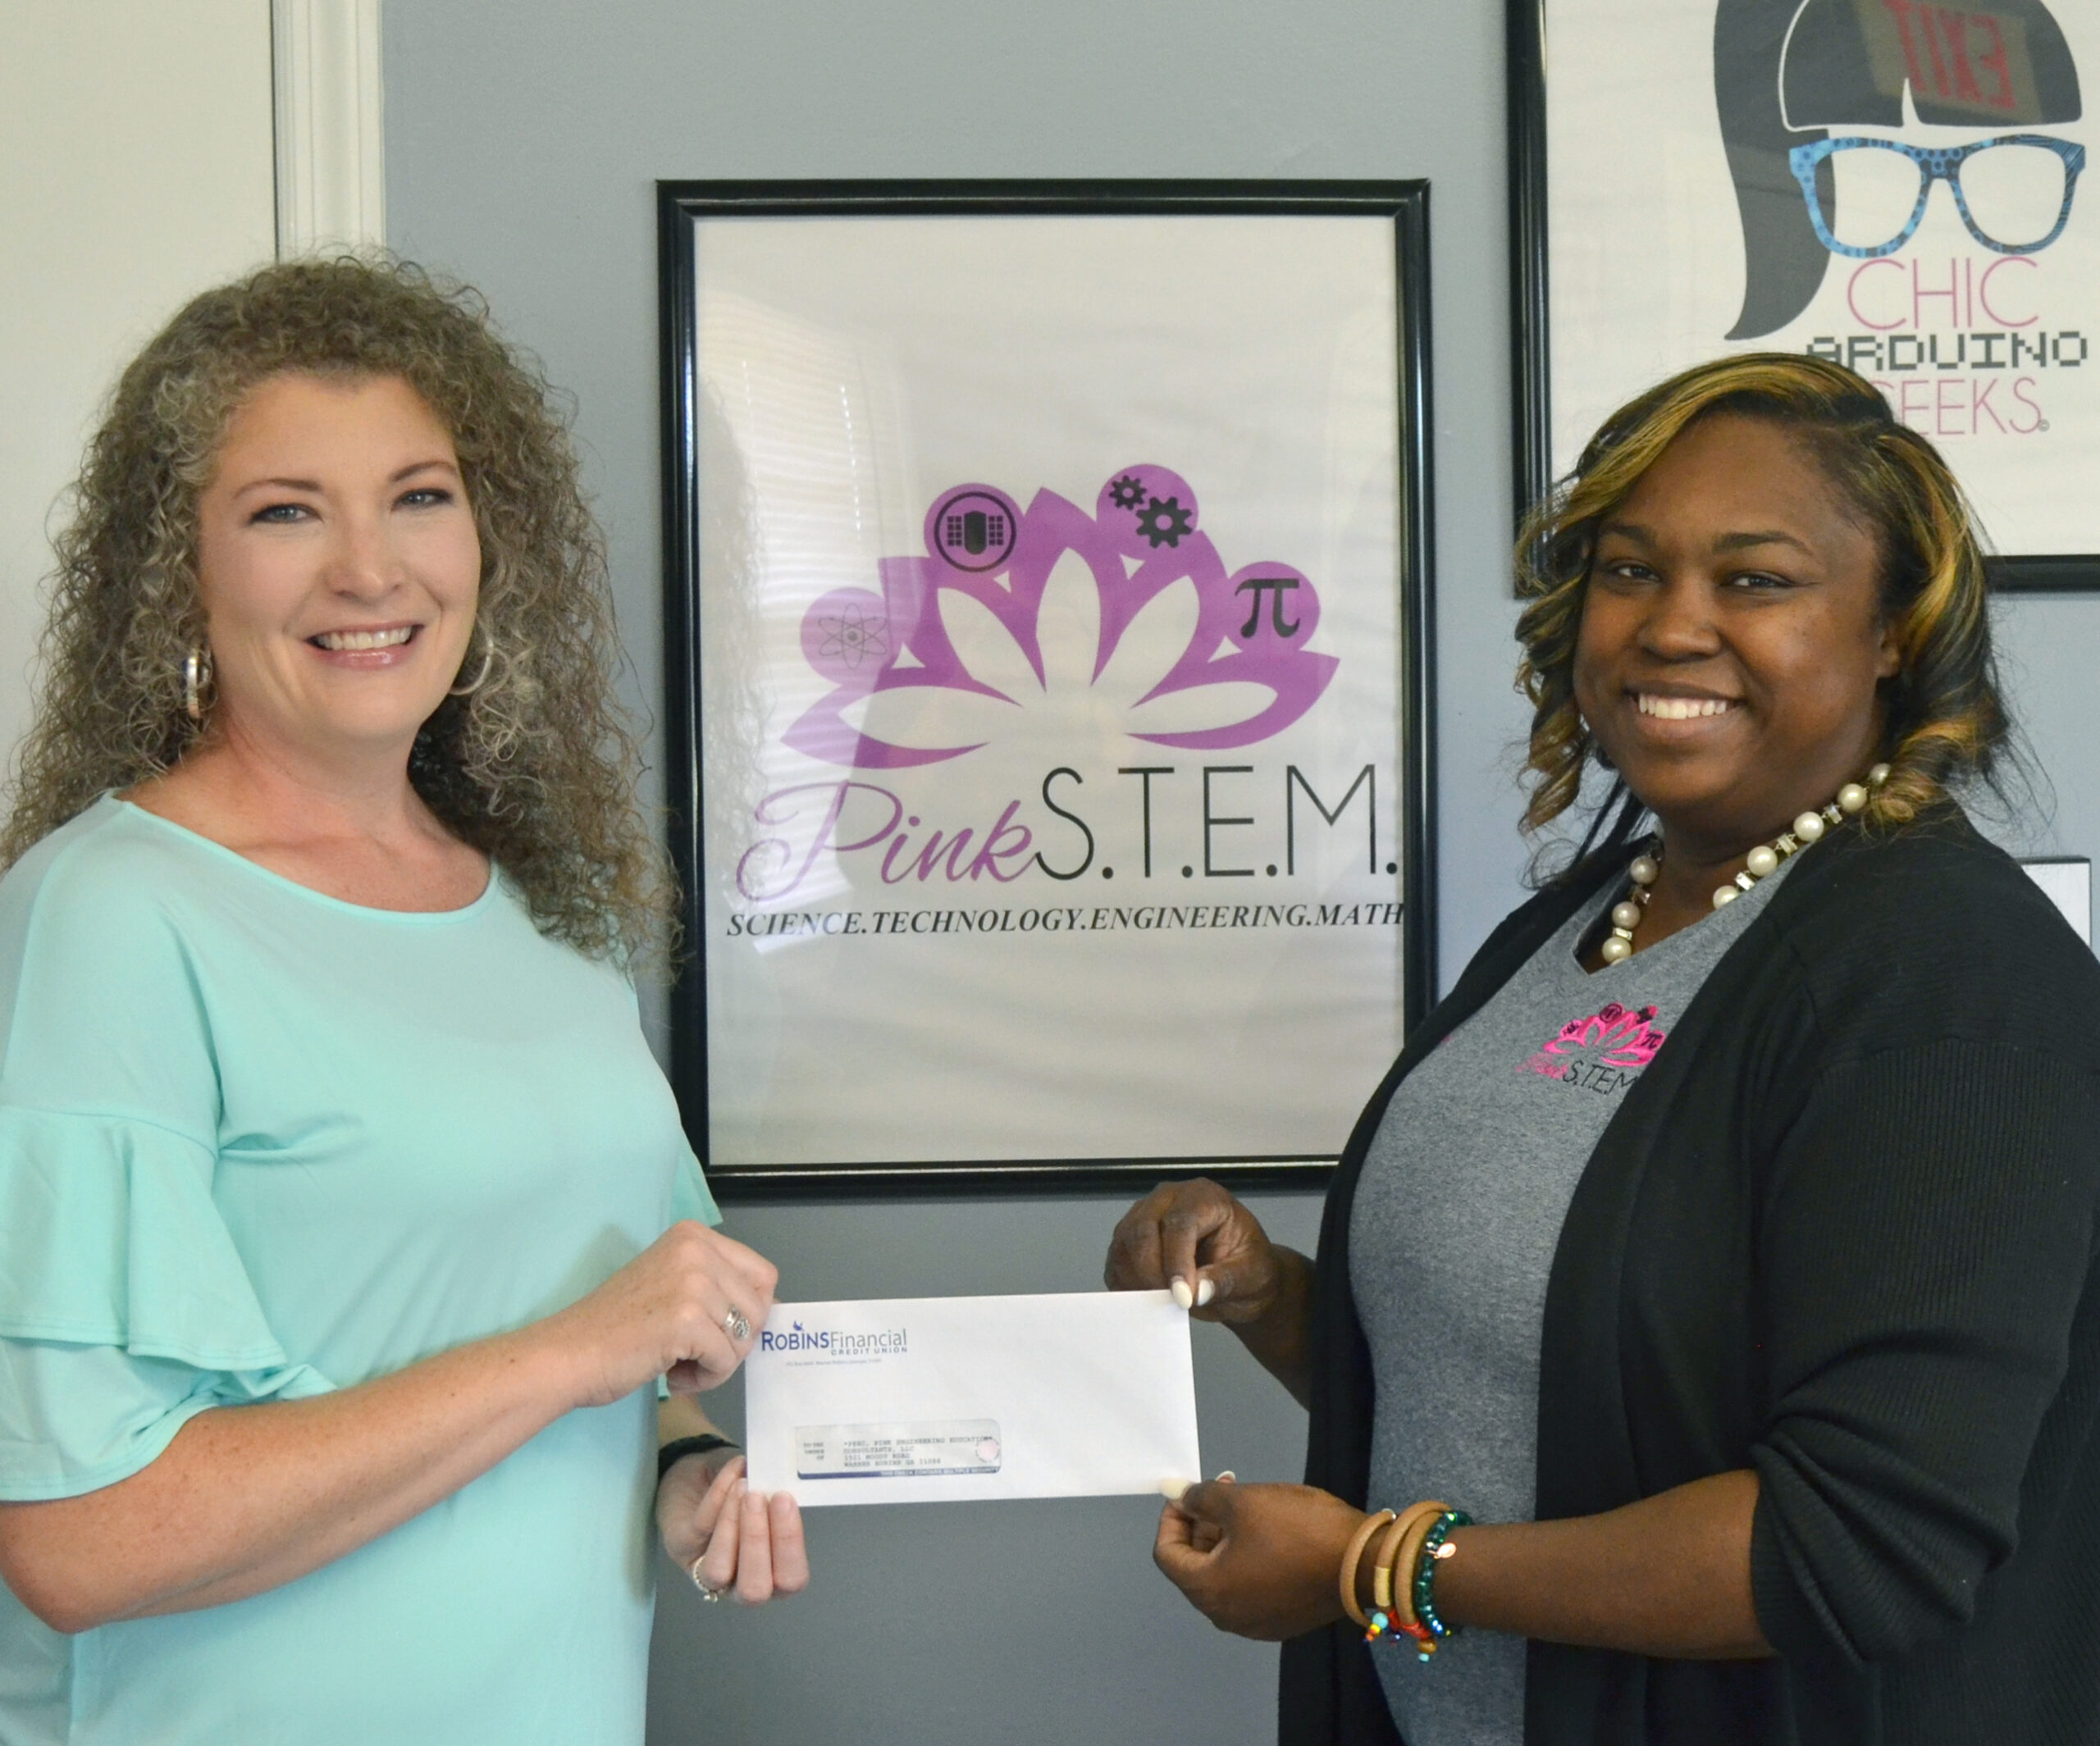 Robins Financial Credit Union Supports STEM